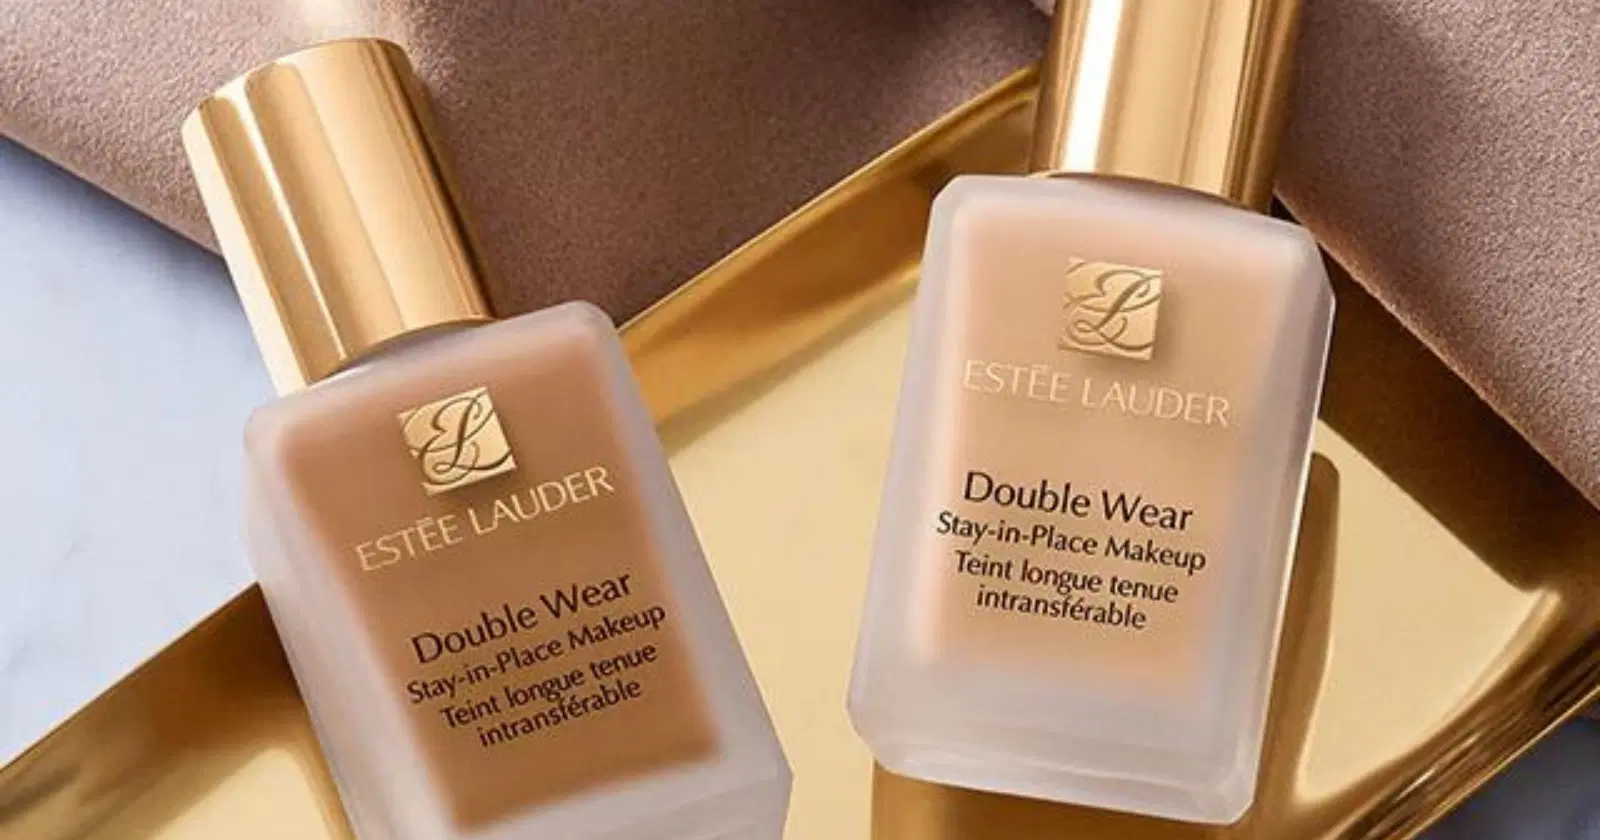 7 Best Estee Lauder Double Wear Dupes To Try Now